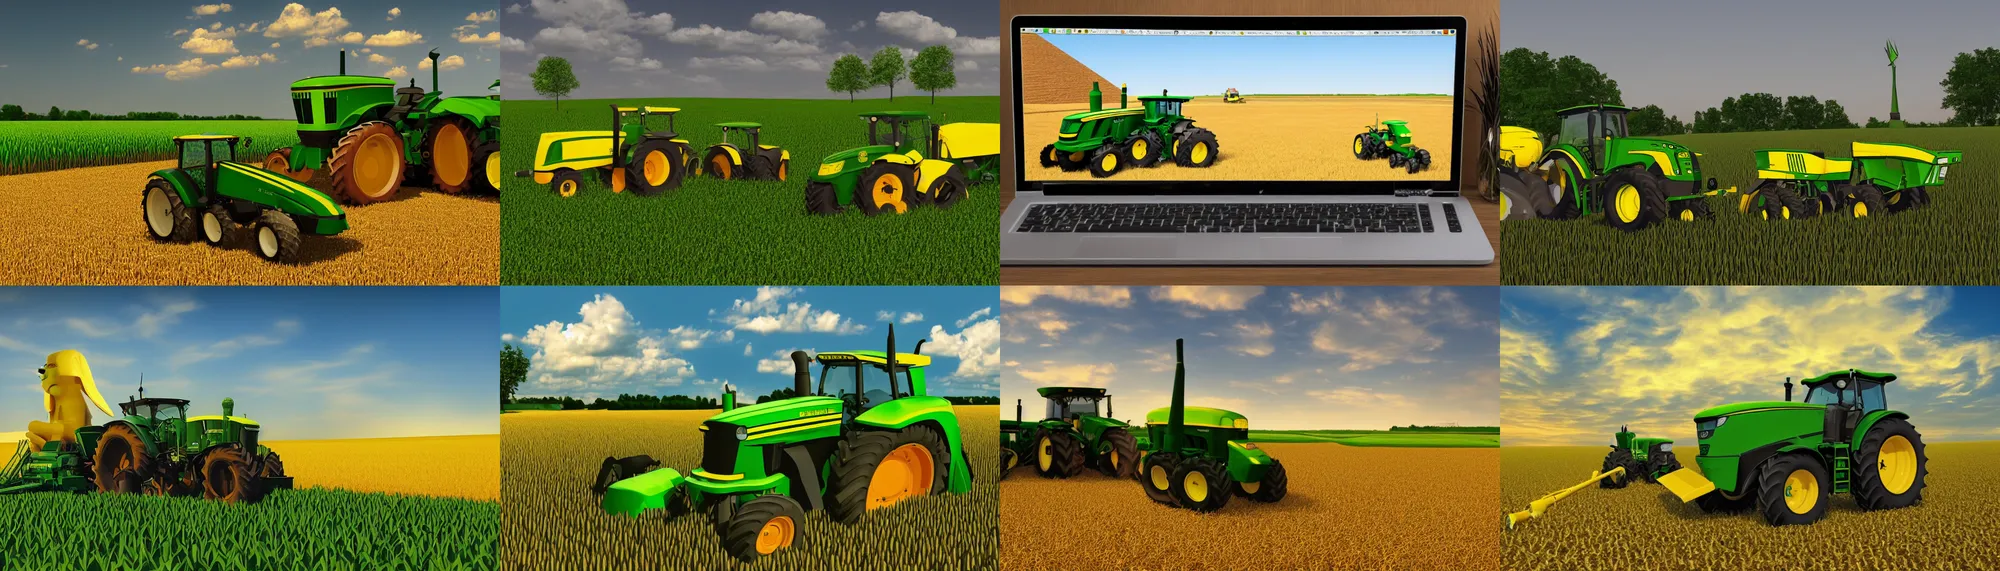 Prompt: Great Sphinx of GizaSphinx coding on a laptop, corn field with a john deere tractor, dynamic lighting, digital art